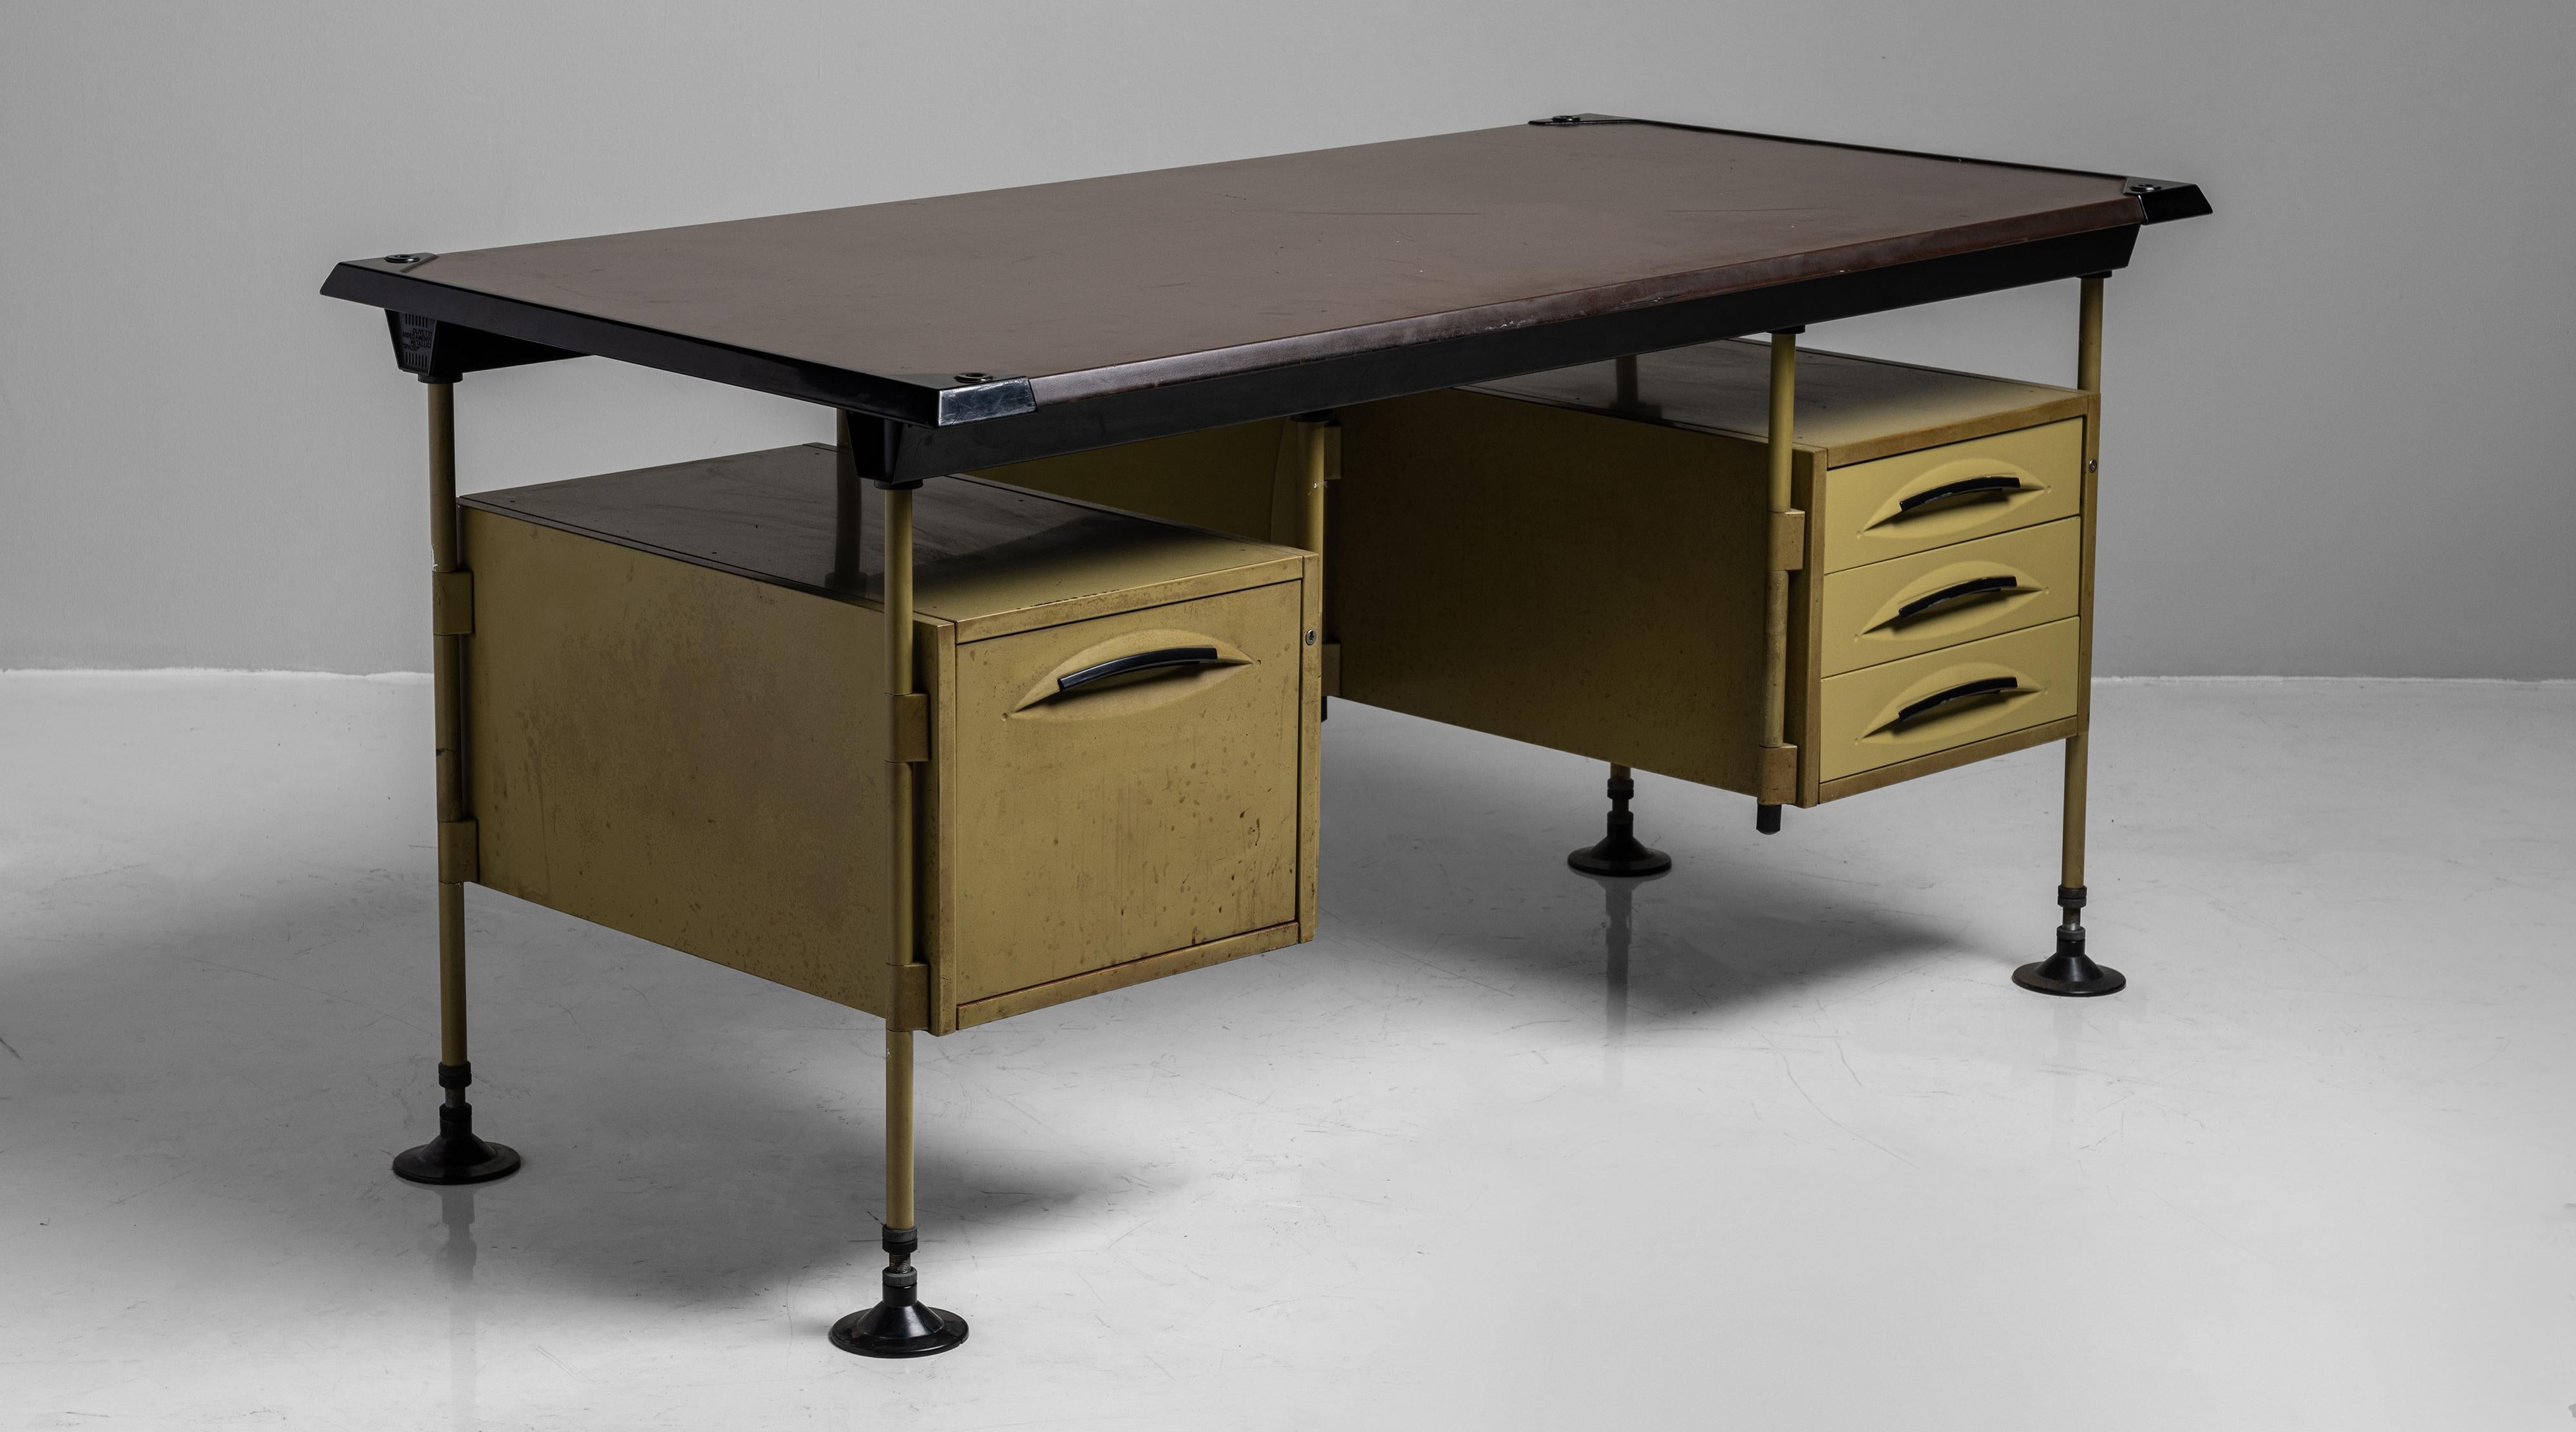 Spazio Modernista desk by Studio BBPR, Italy, 1959

Painted metal in original finish with laminated wood writing surface. Produced by Olivetti.

Measures: 62.75” W x 31.25” D x 31.25” H

    

$ 5,200.